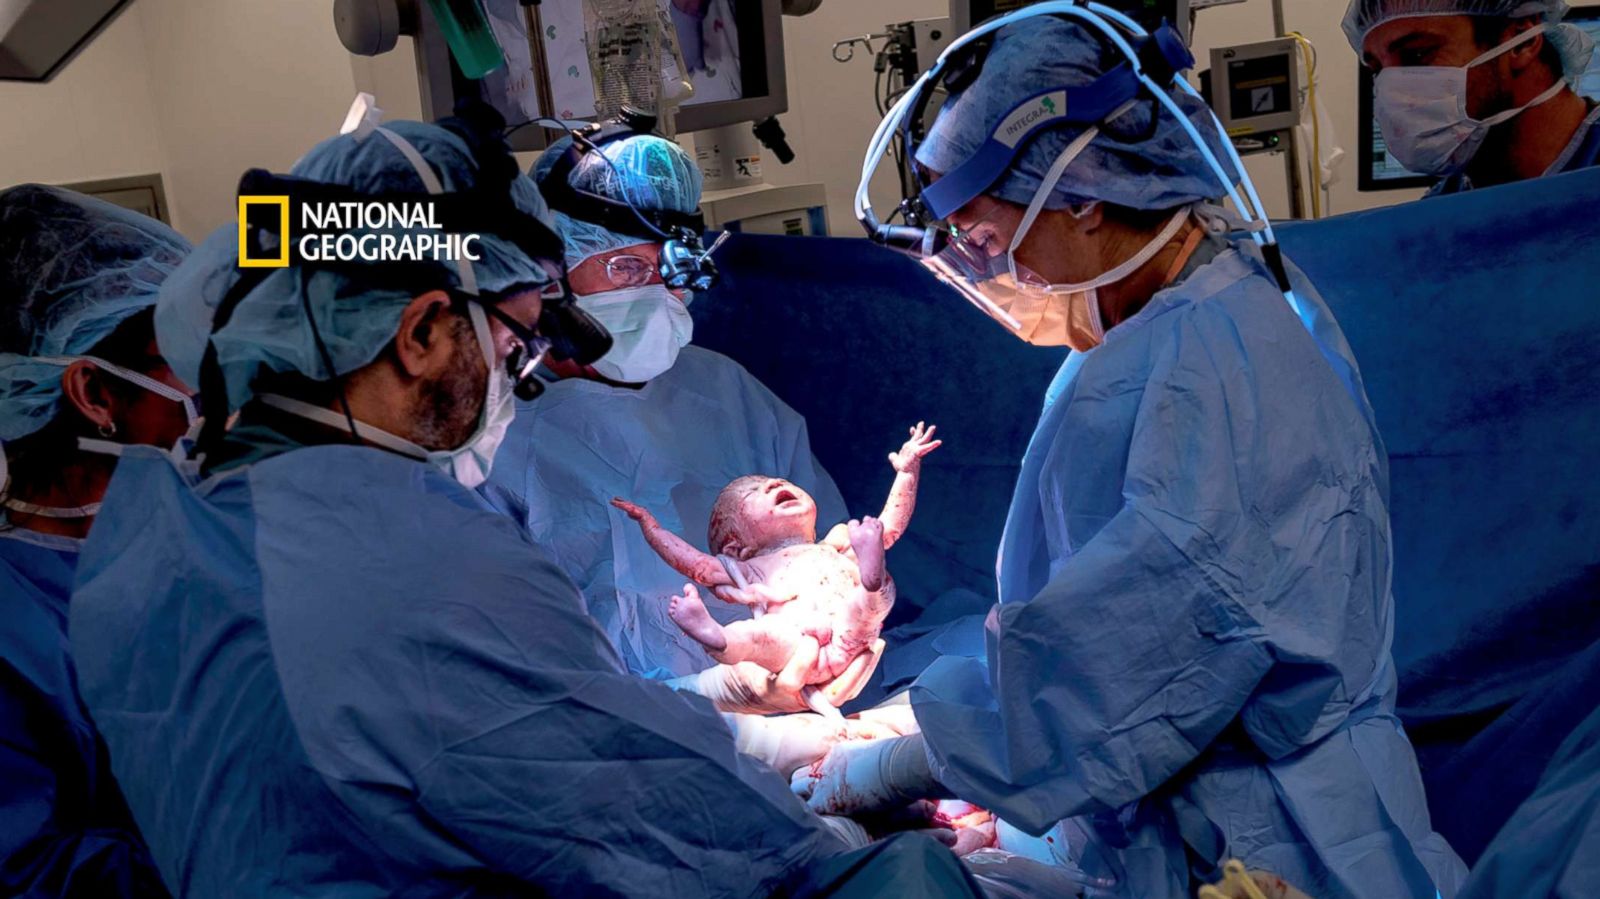 Giving Birth by a Surgical C-Section